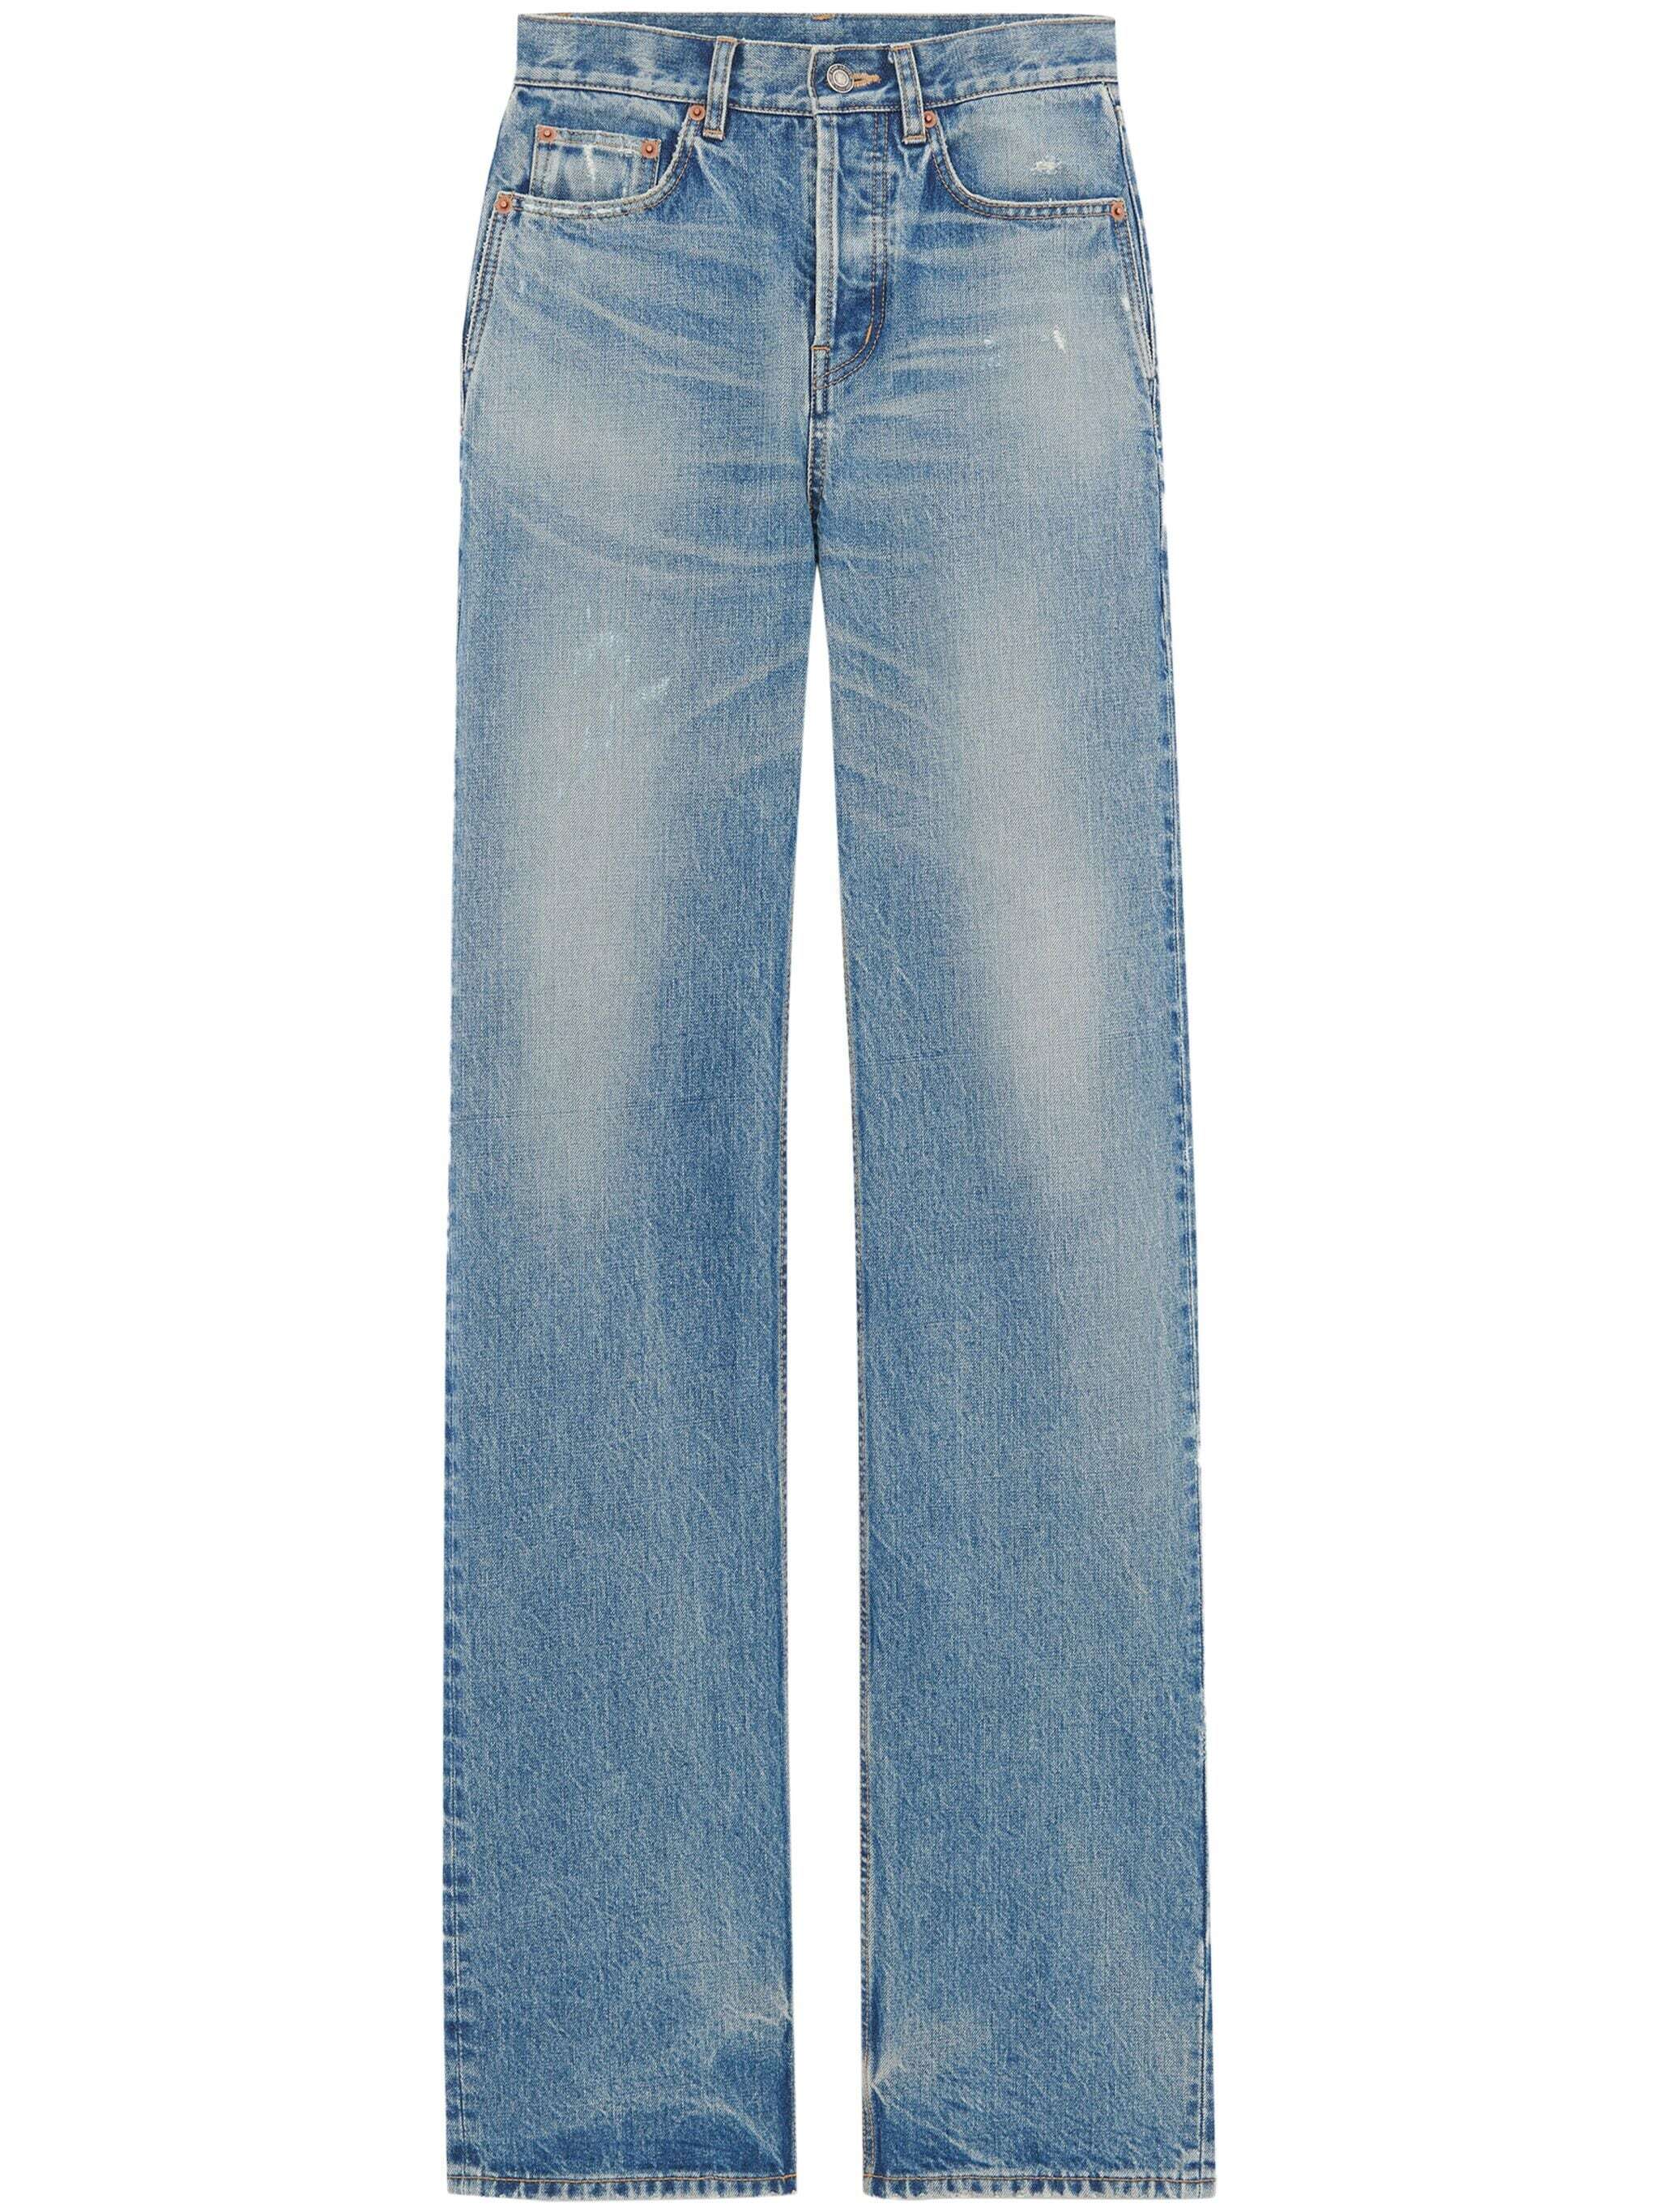 Long straight jeans